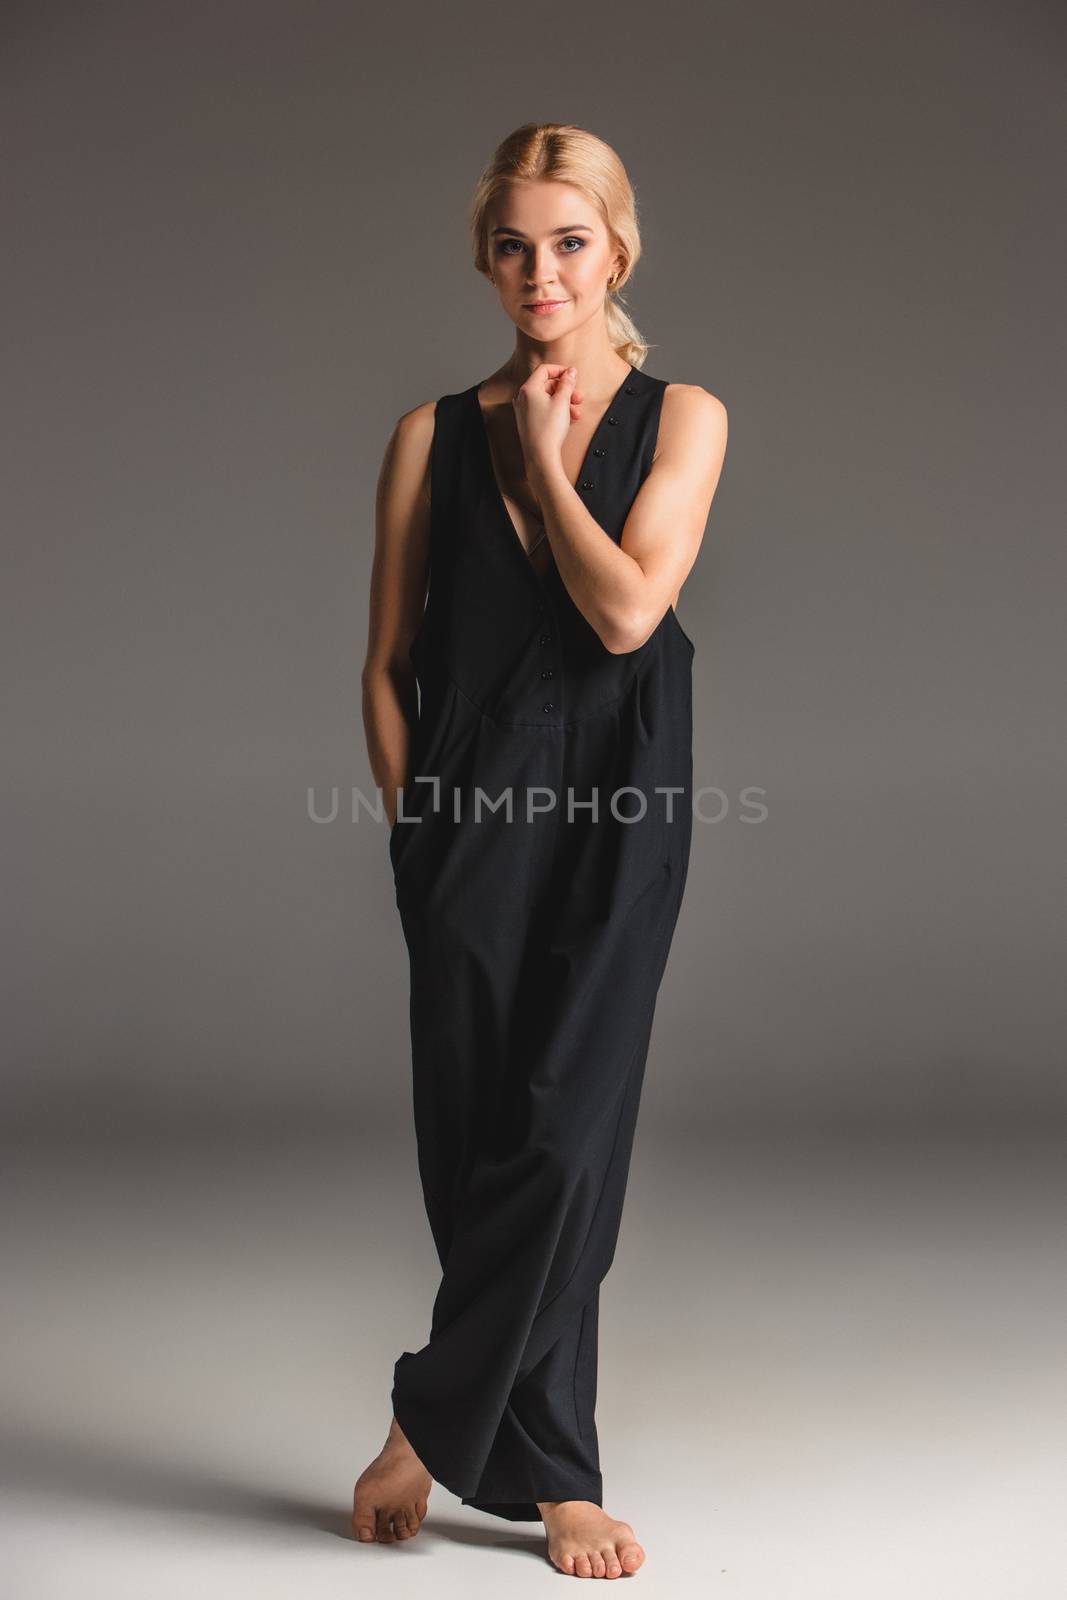 Beauty blond woman  in a black coveralls on a gray background. Portrait in full growth